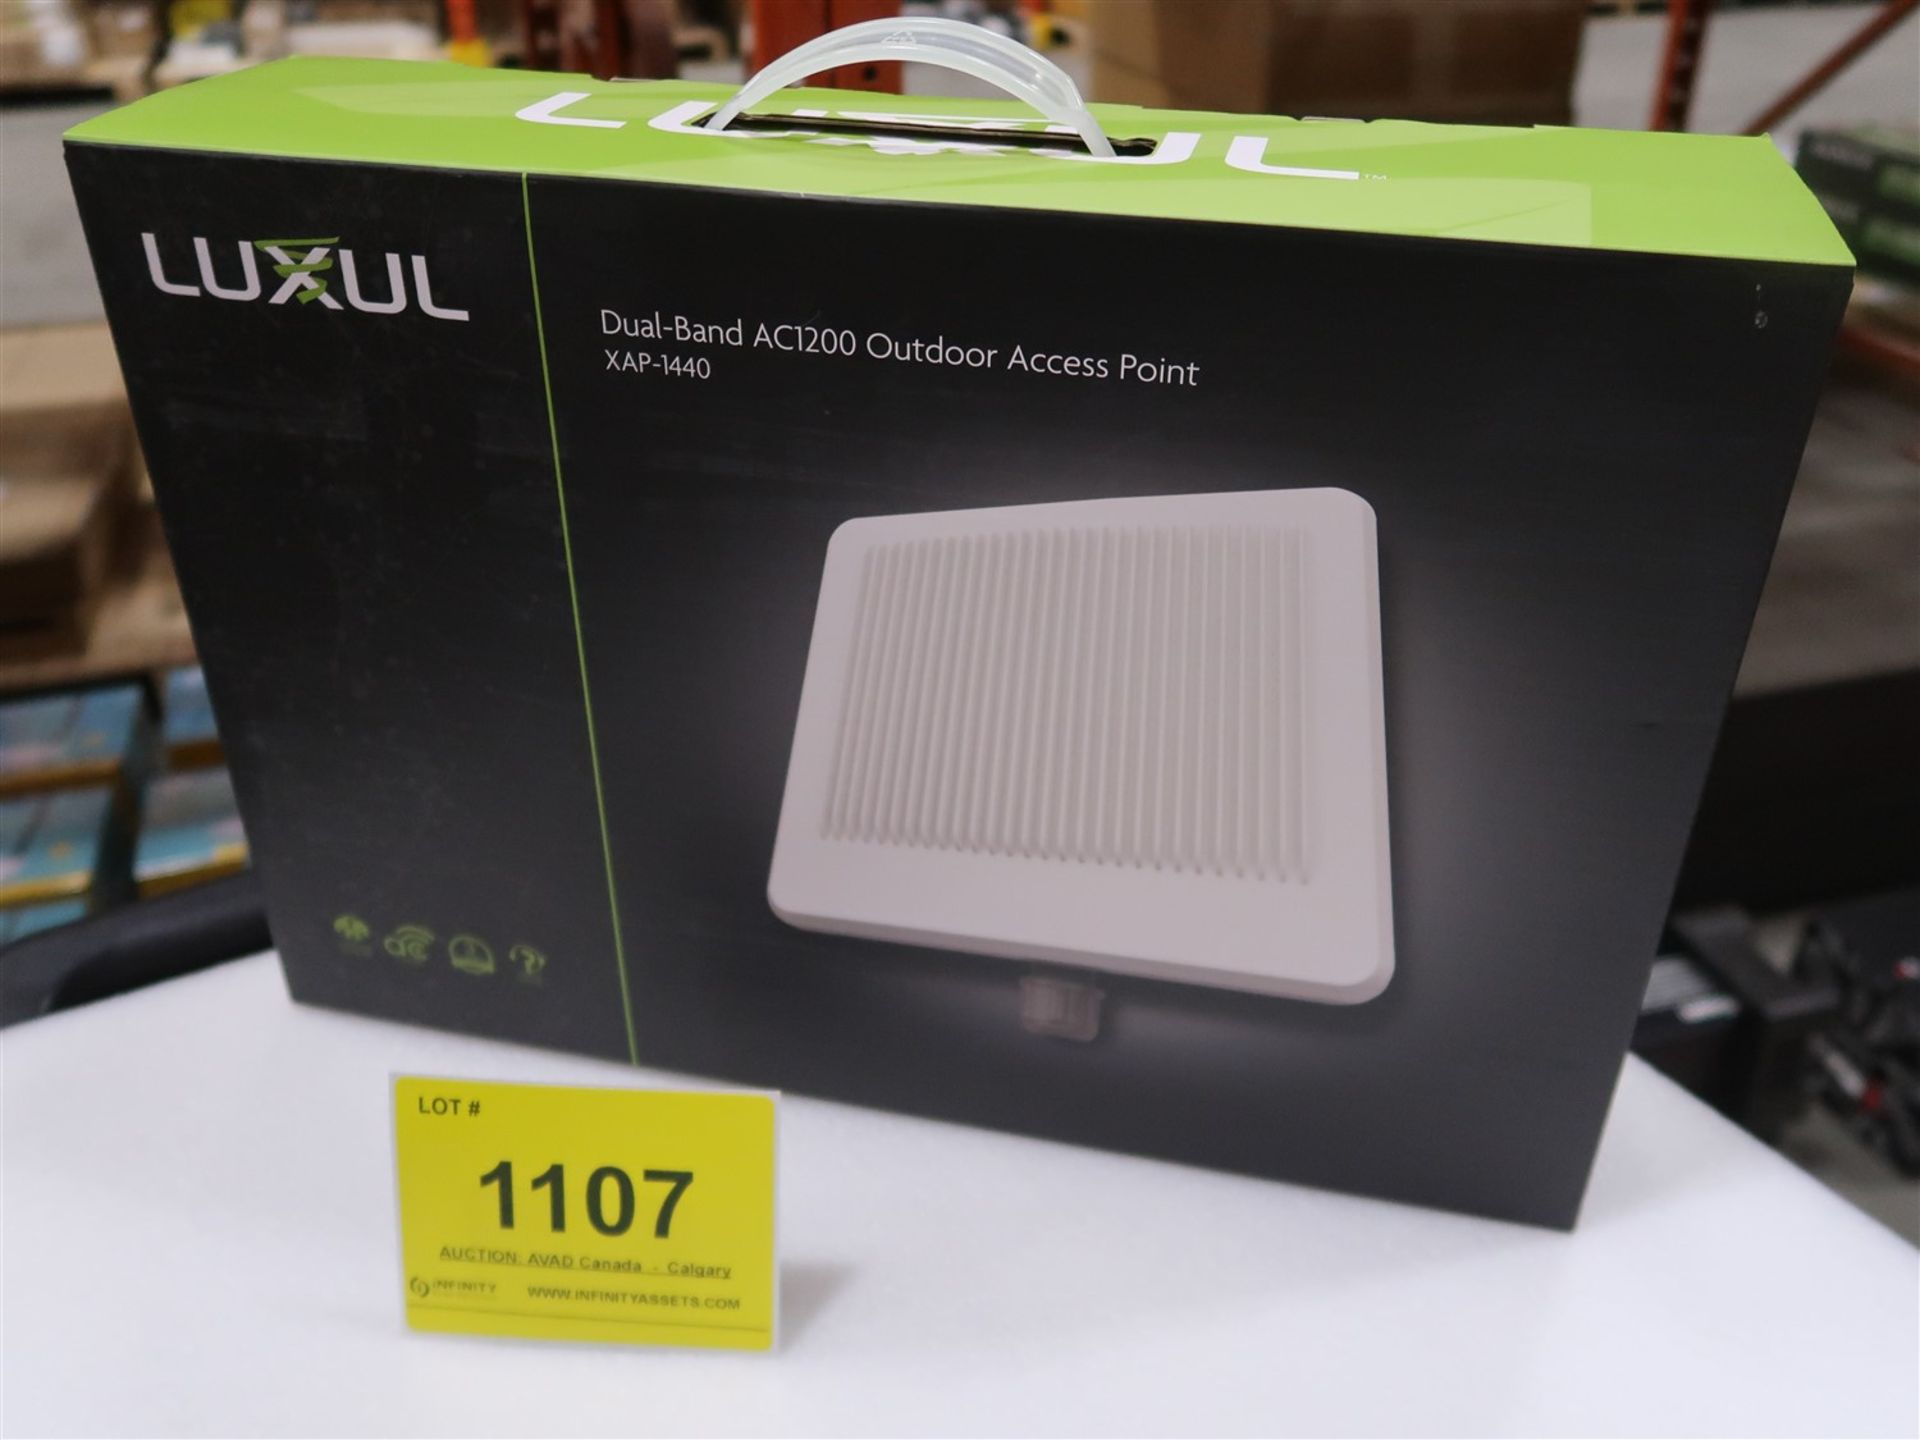 LUXUL DUAL BAND AC1200 OUTDOOR ACCESS POINT XAP 1440, (BNIB) MSRP $700